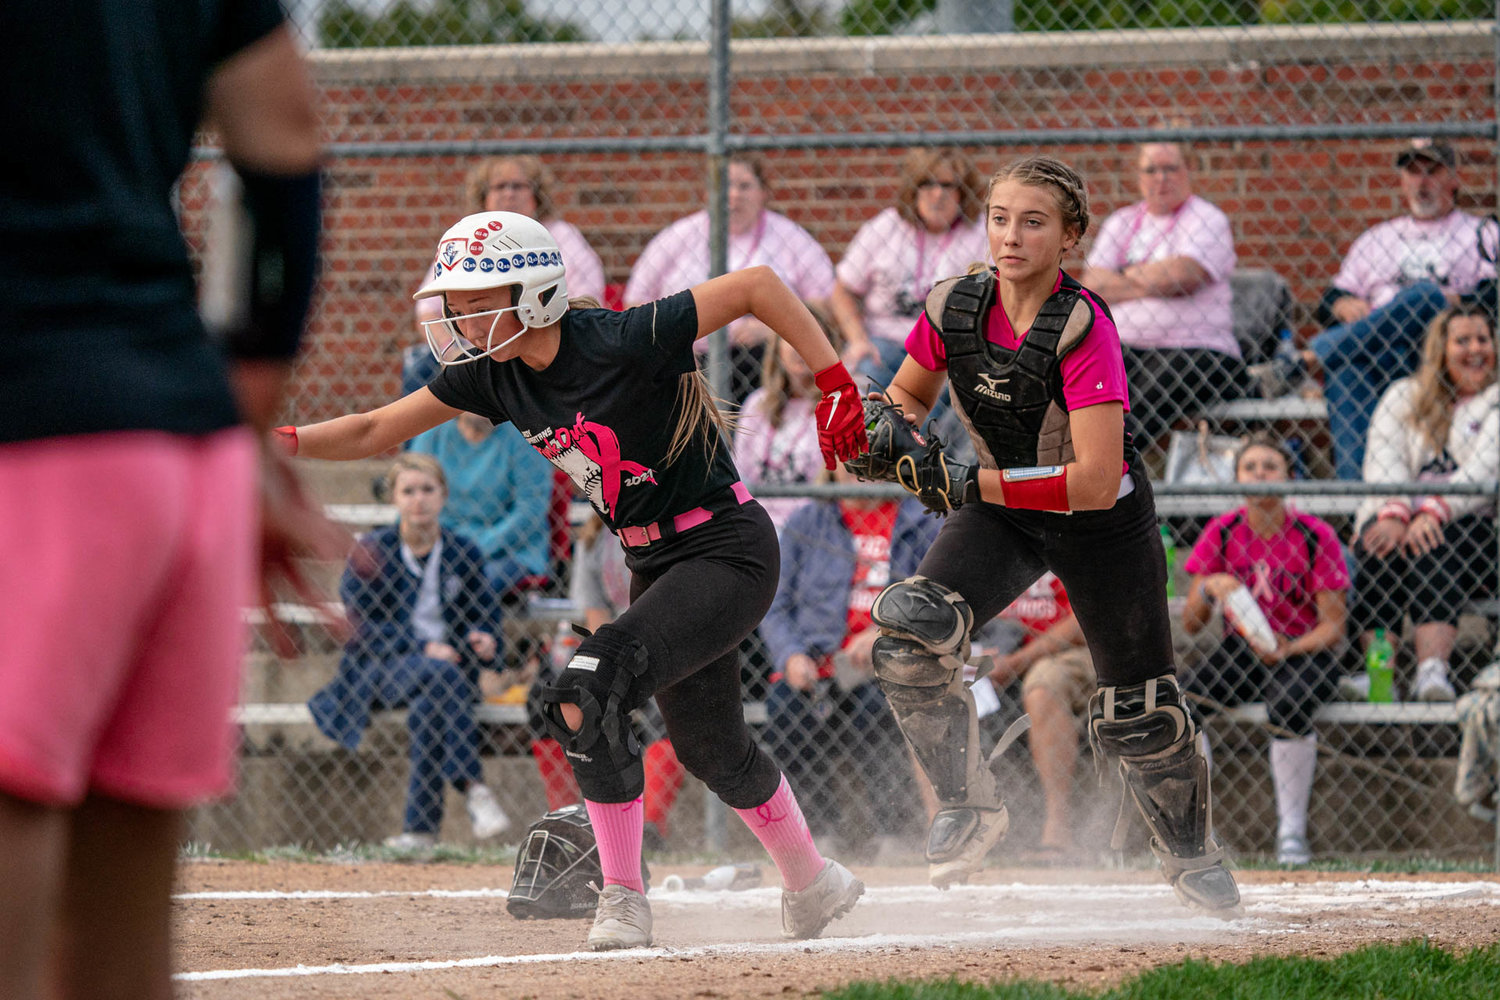 Bulldogs catcher Karlee Sefrit chases down a Moberly runner. [Eric Mattson]